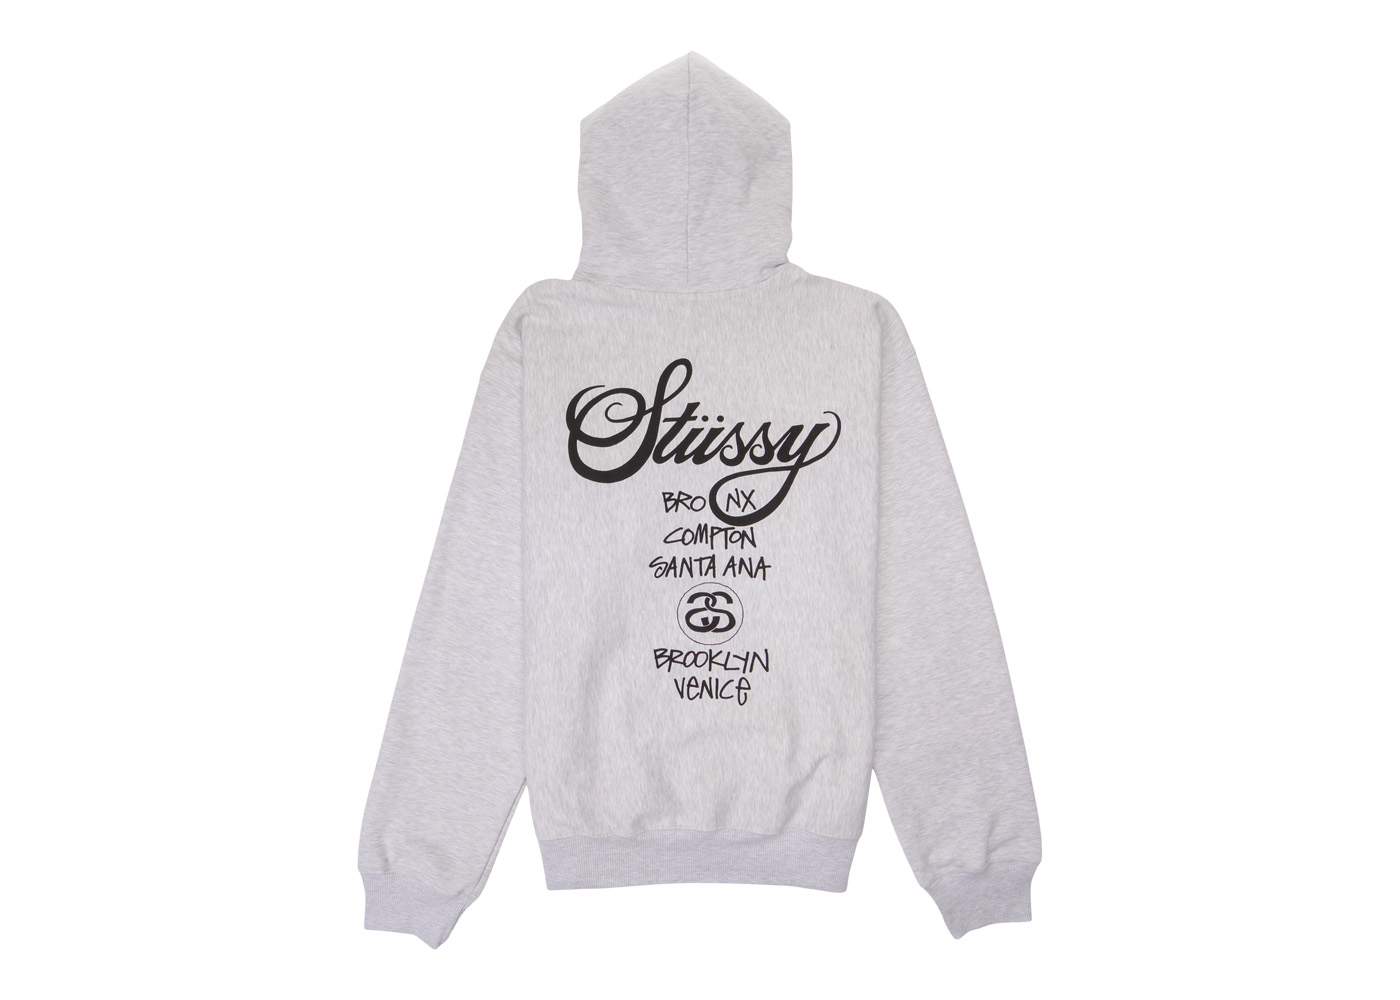 The Ultimate Stussy Size Guide: Everything You Need To Know